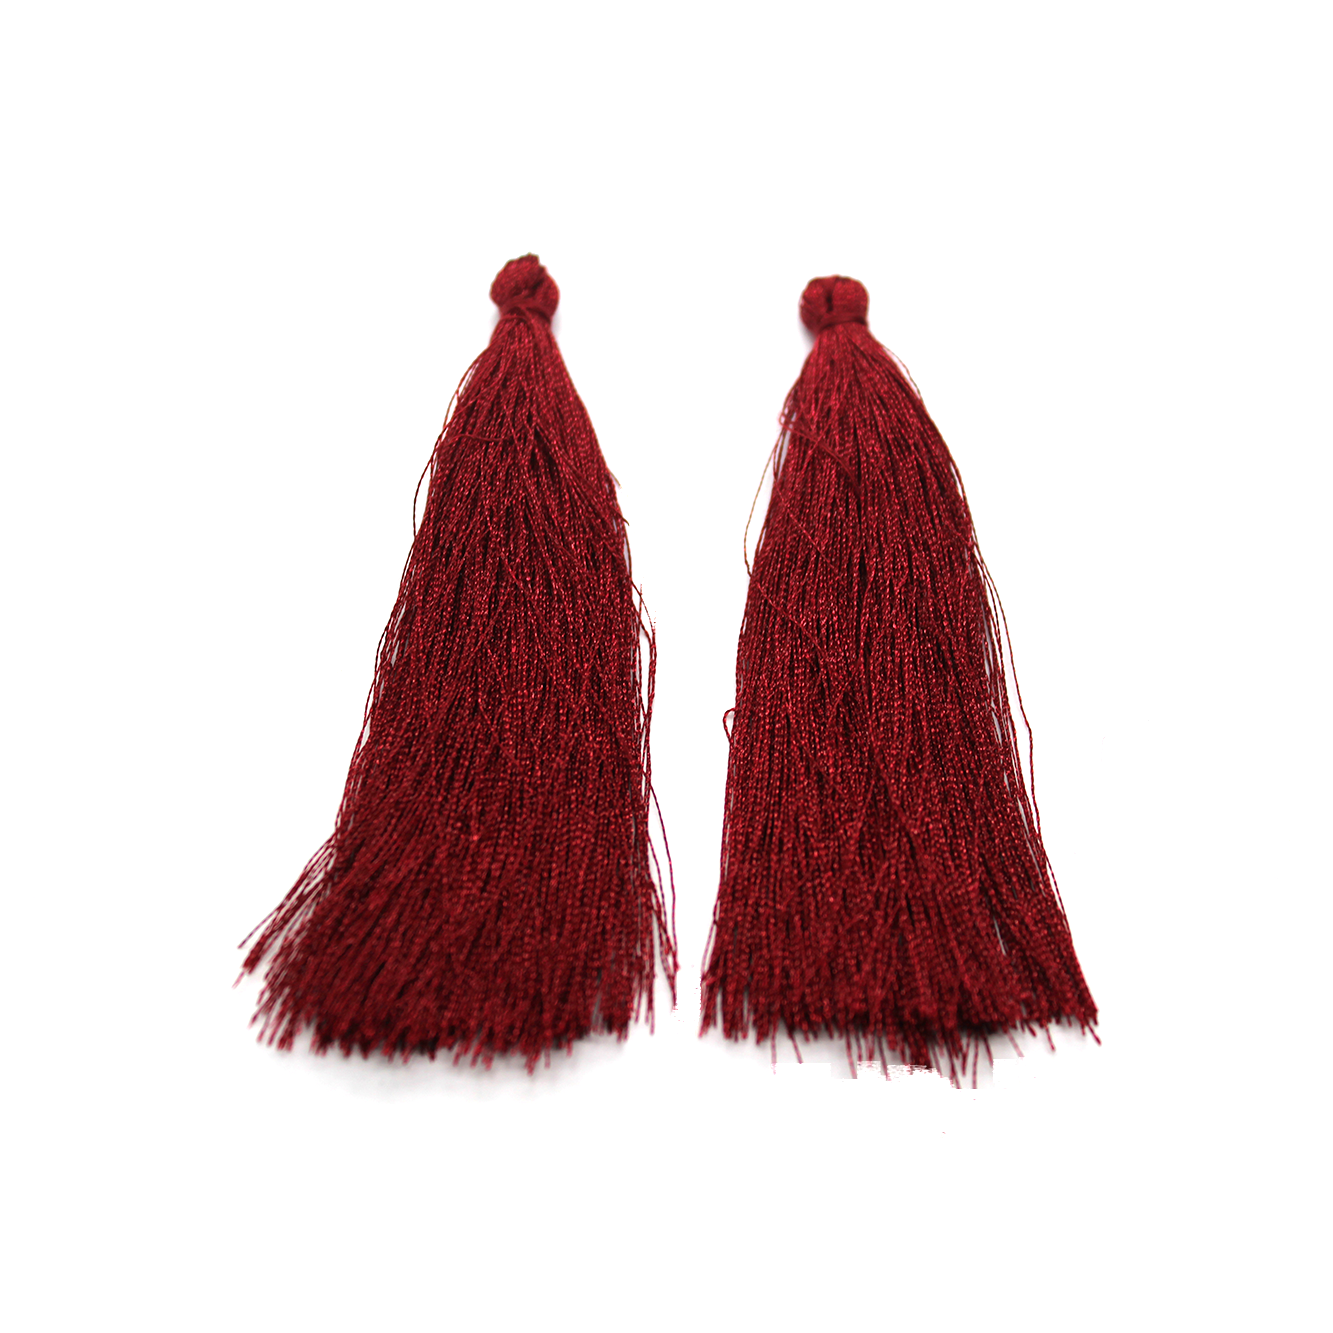 Tassels, Silk Thread, 3.5 inch, 5pcs, Available in 5 colors